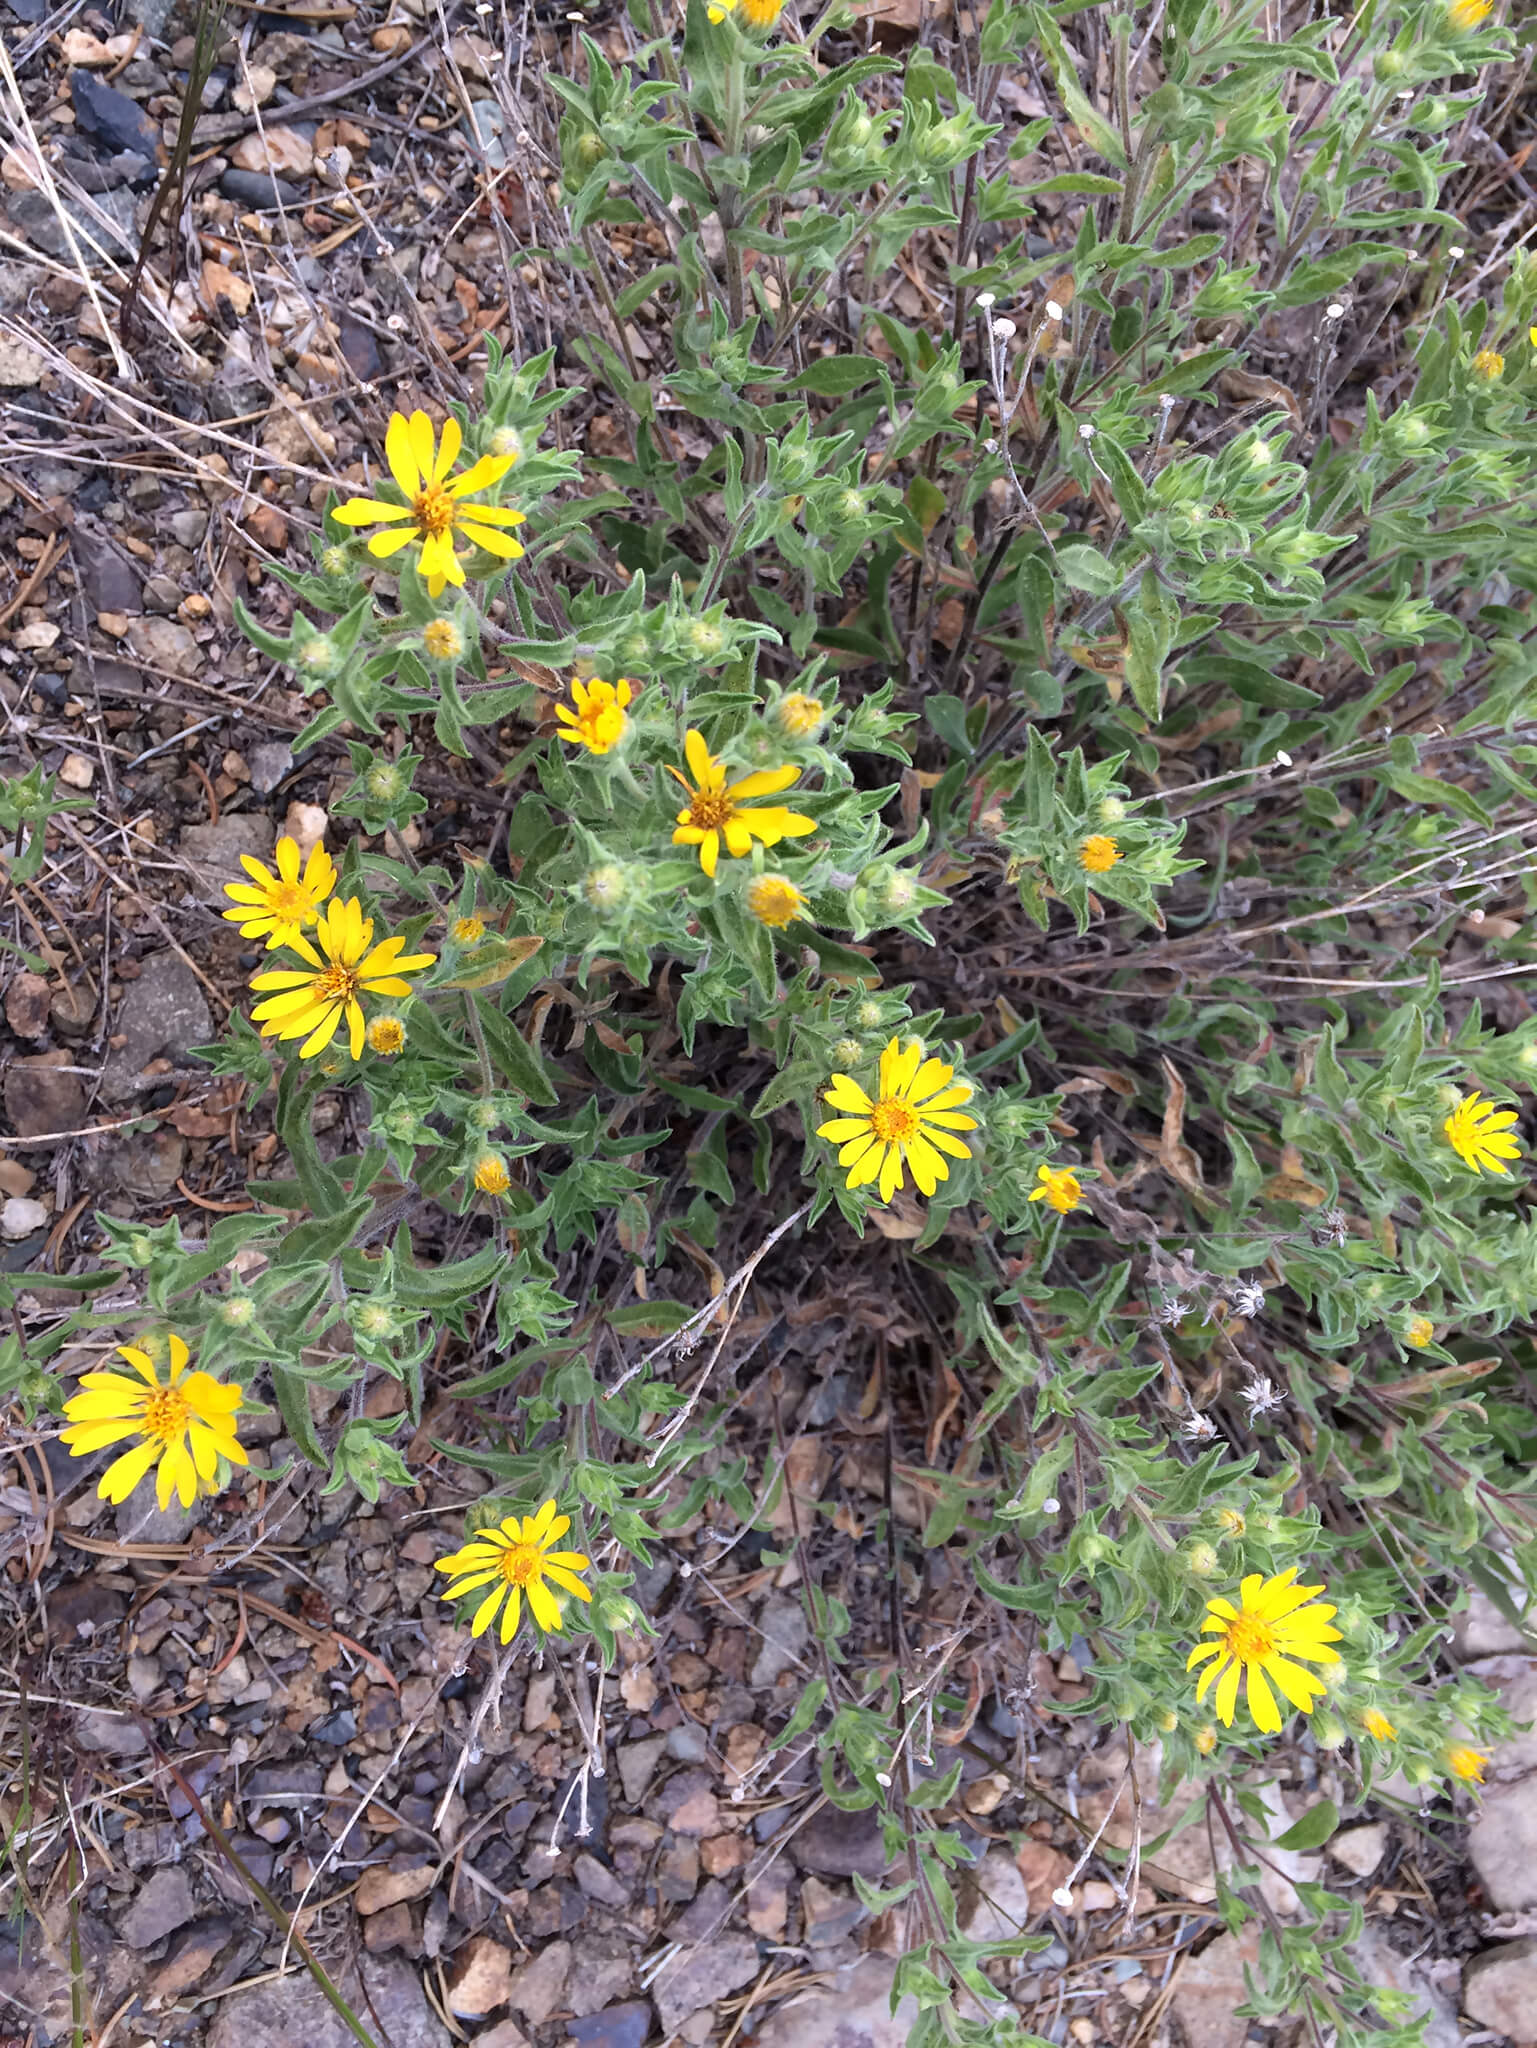 Golden Aster: One of the many DYCs (Darn Yellow Composite flowers)